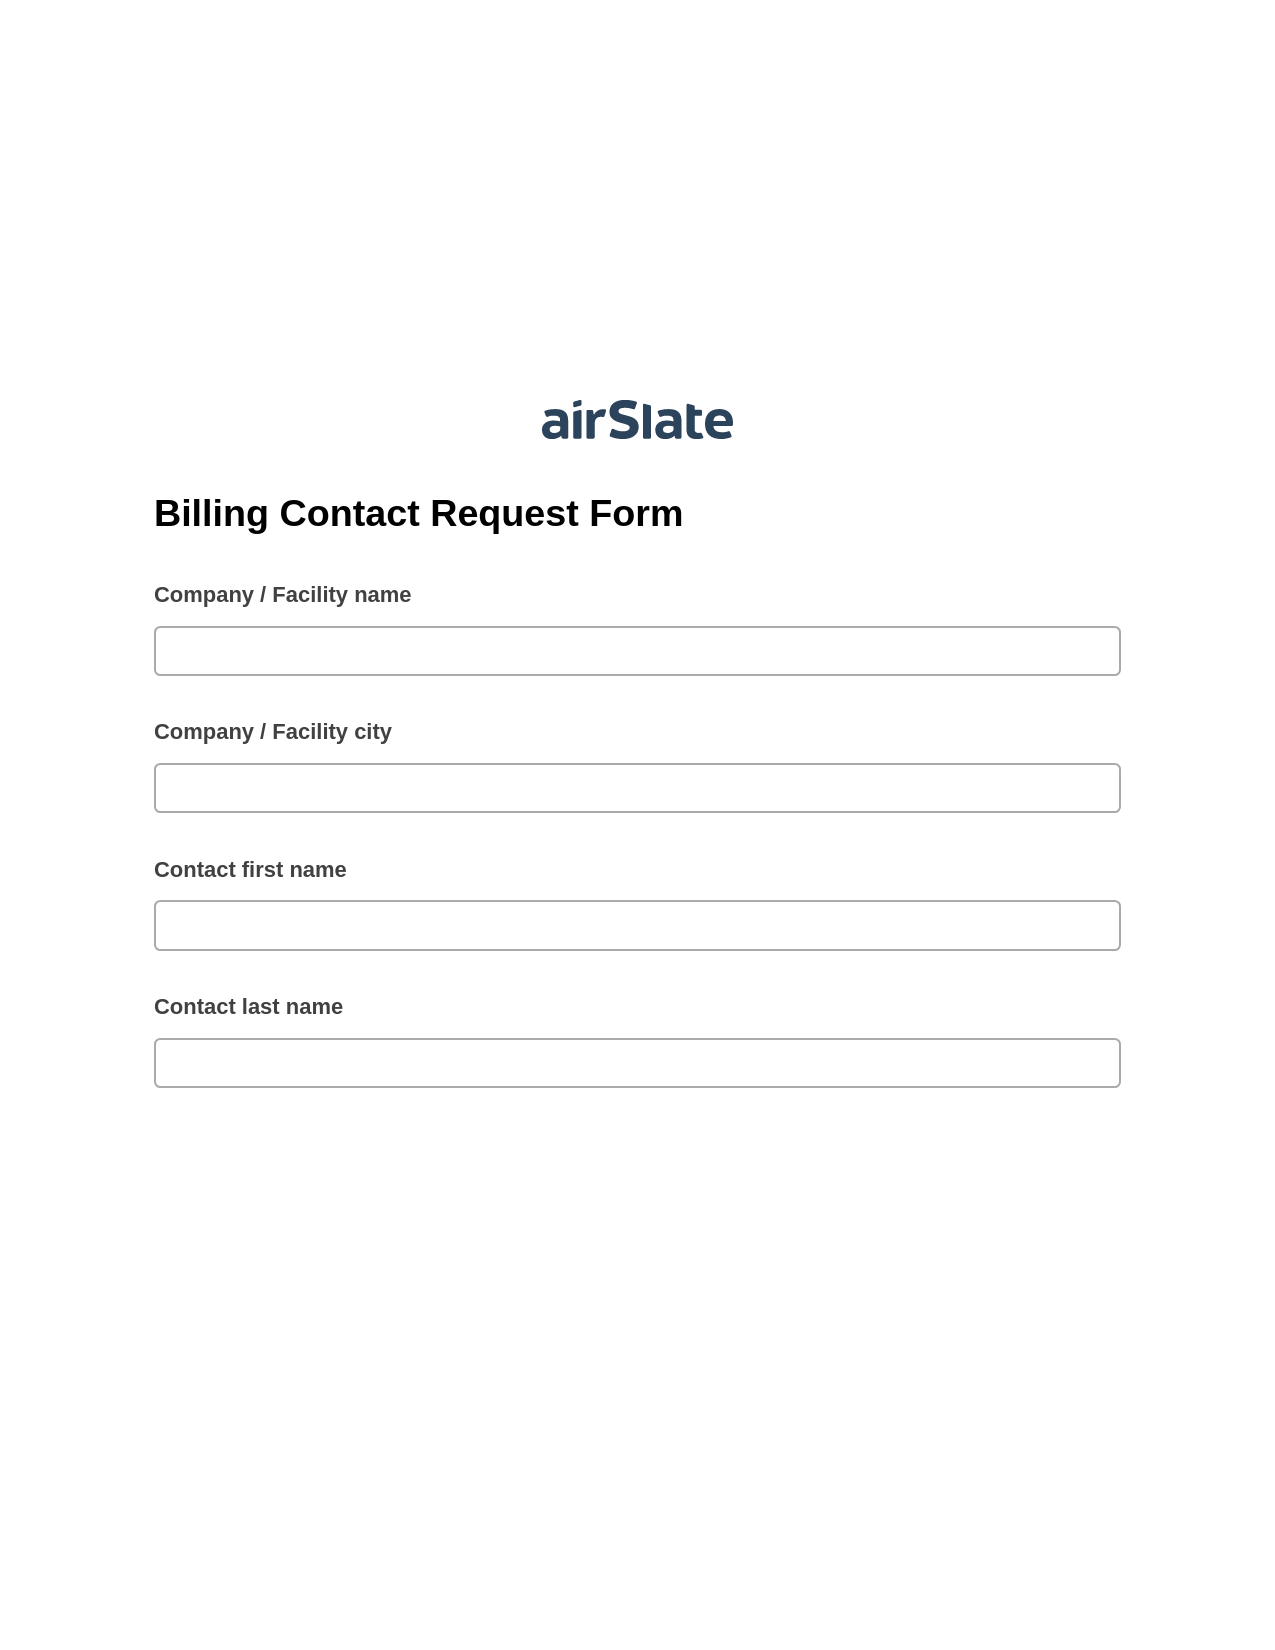 Multirole Billing Contact Request Form Pre-fill from CSV File Bot, Create slate from another Flow Bot, Export to Excel 365 Bot